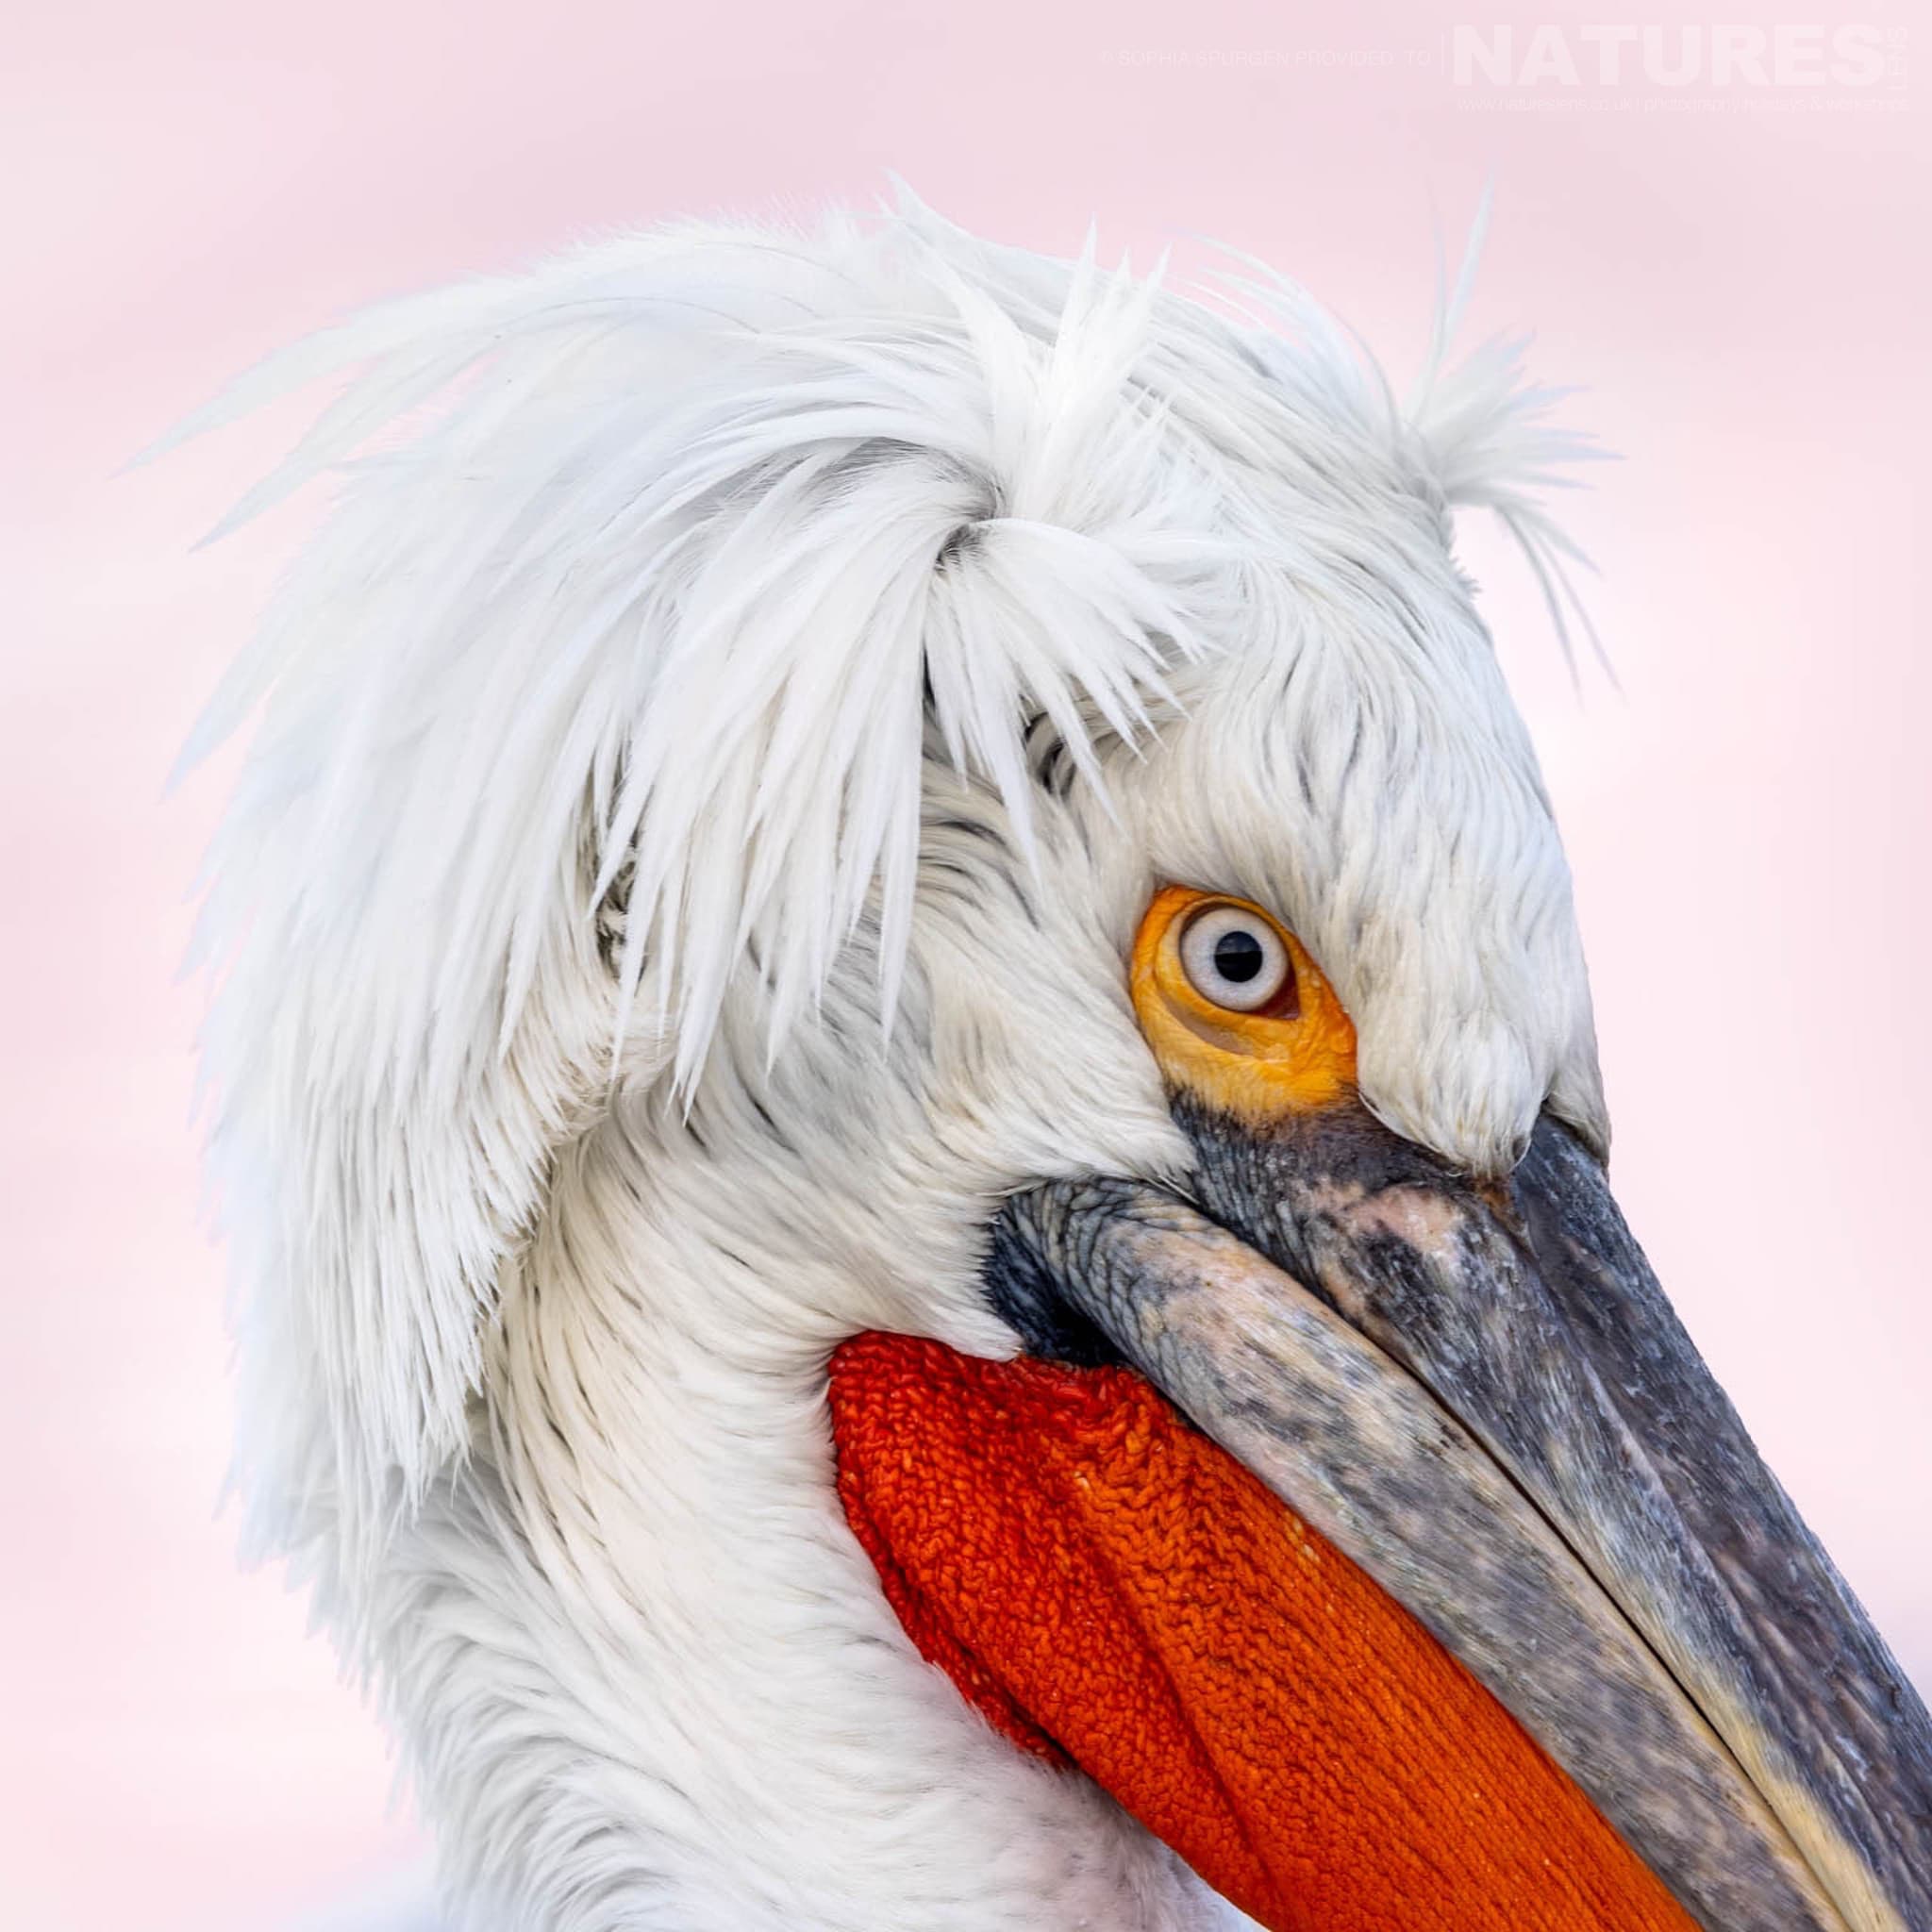 A Portrait Of One Of The Dalmatian Pelicans Of Greece]